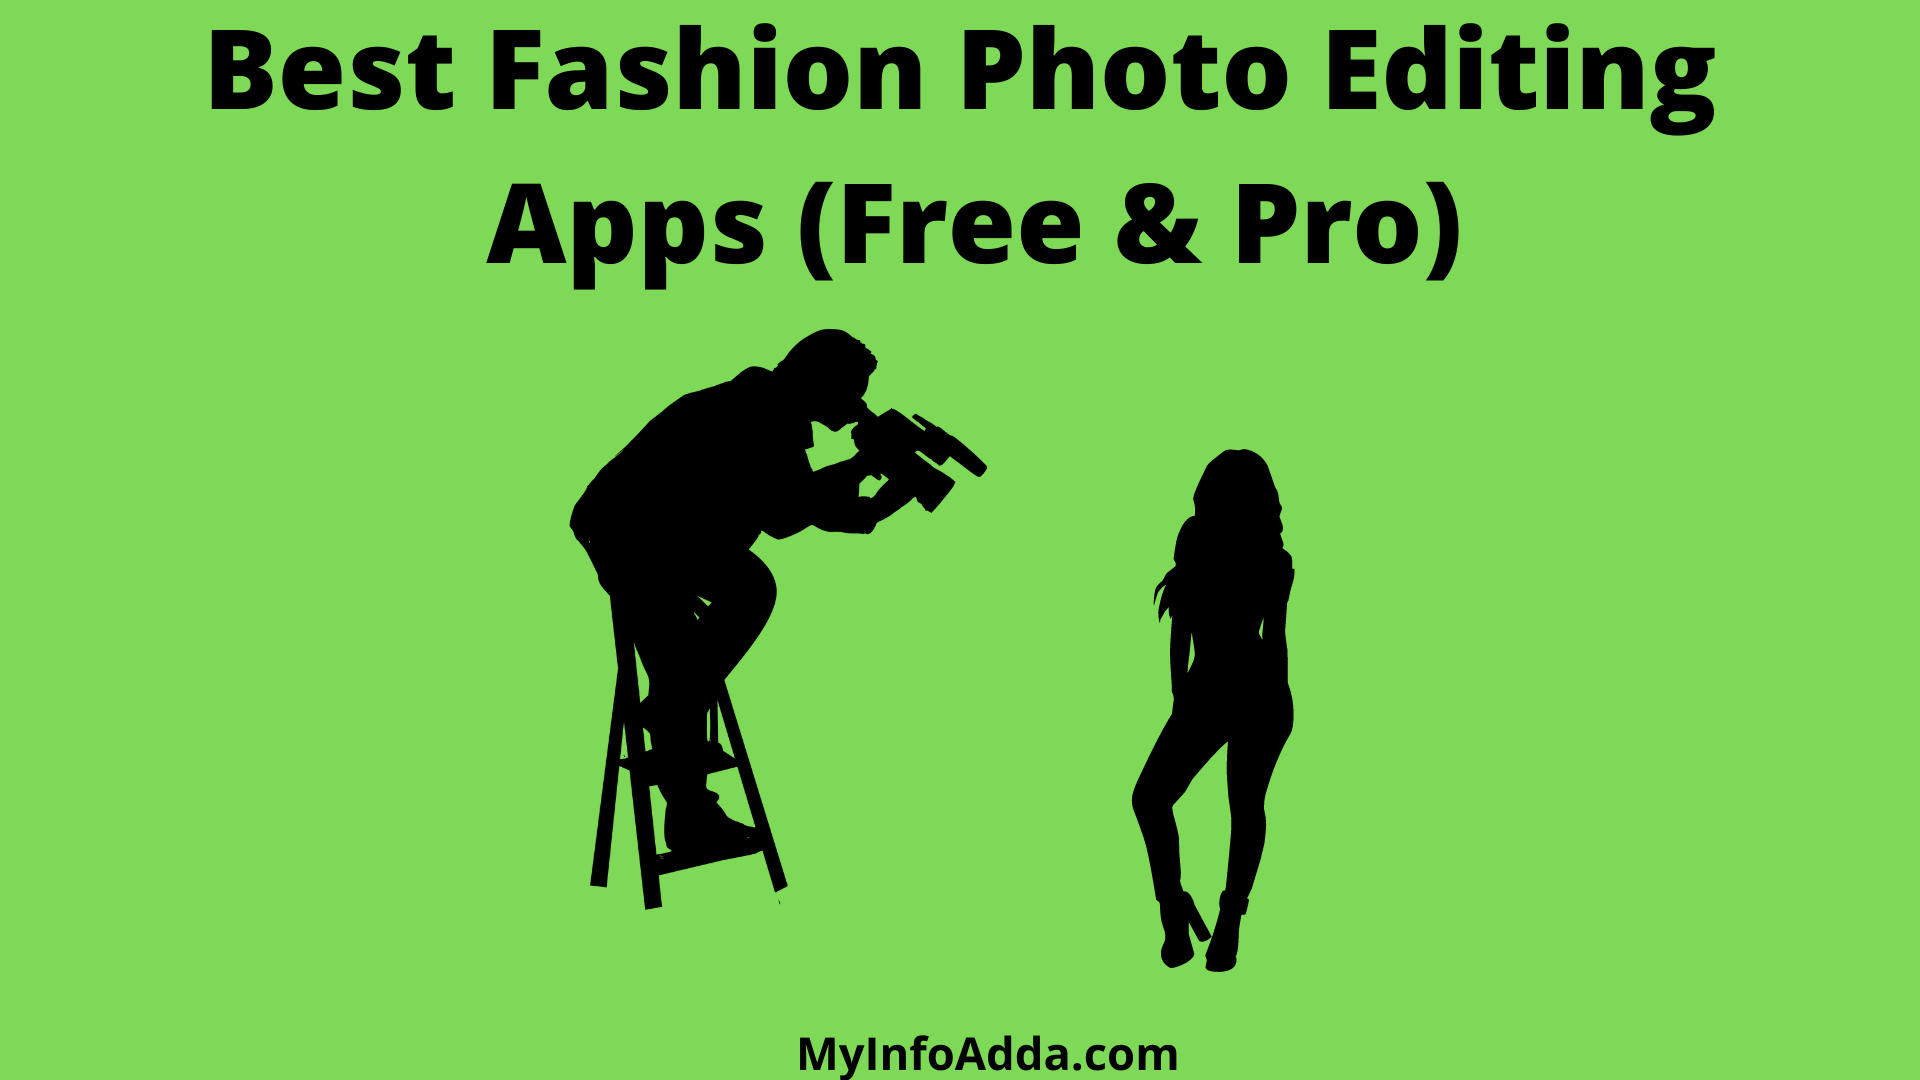 Best Fashion Photo Editing Apps (Free & Pro)